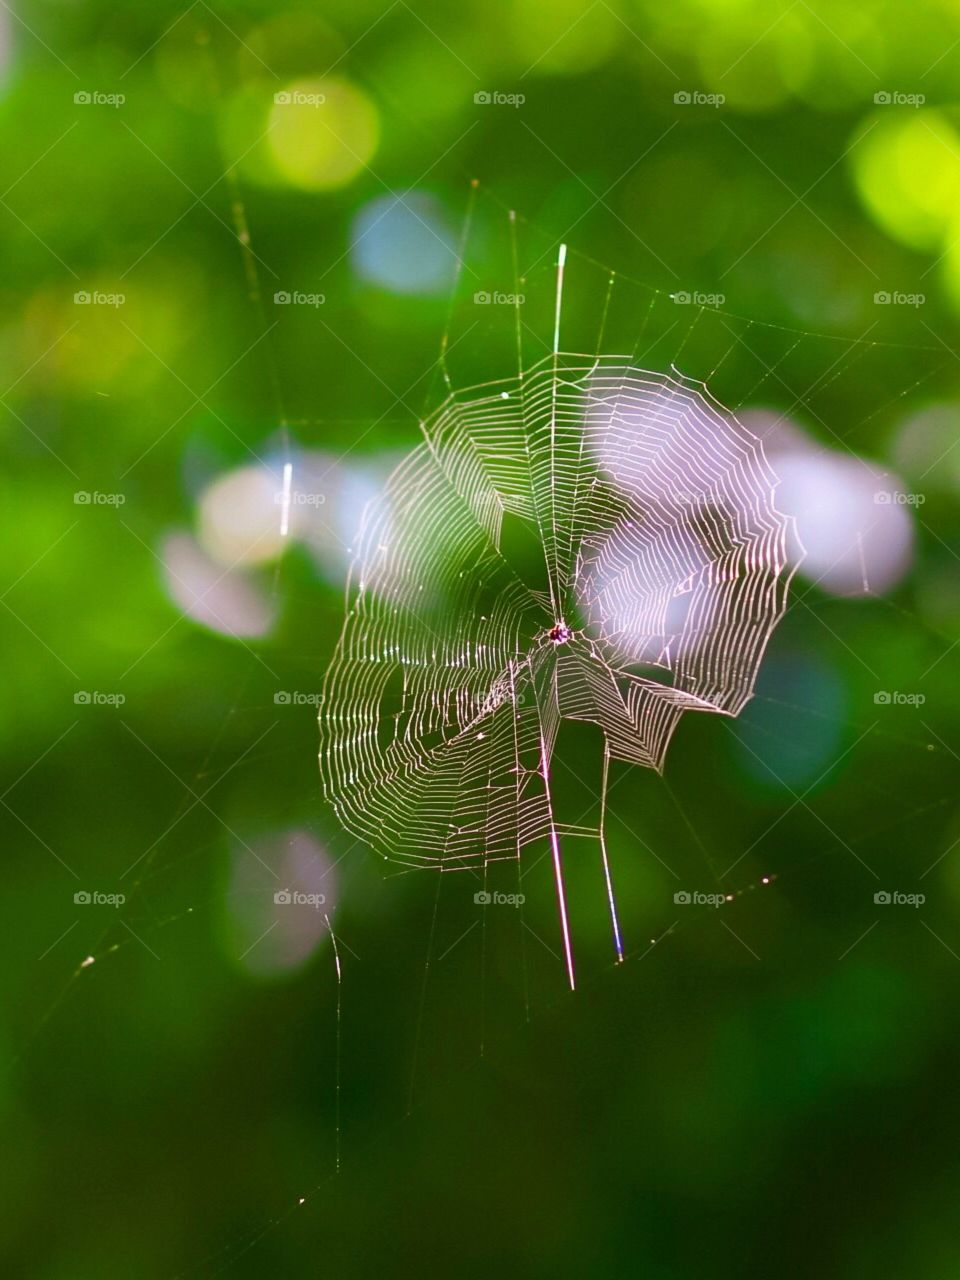 The Spider Web 